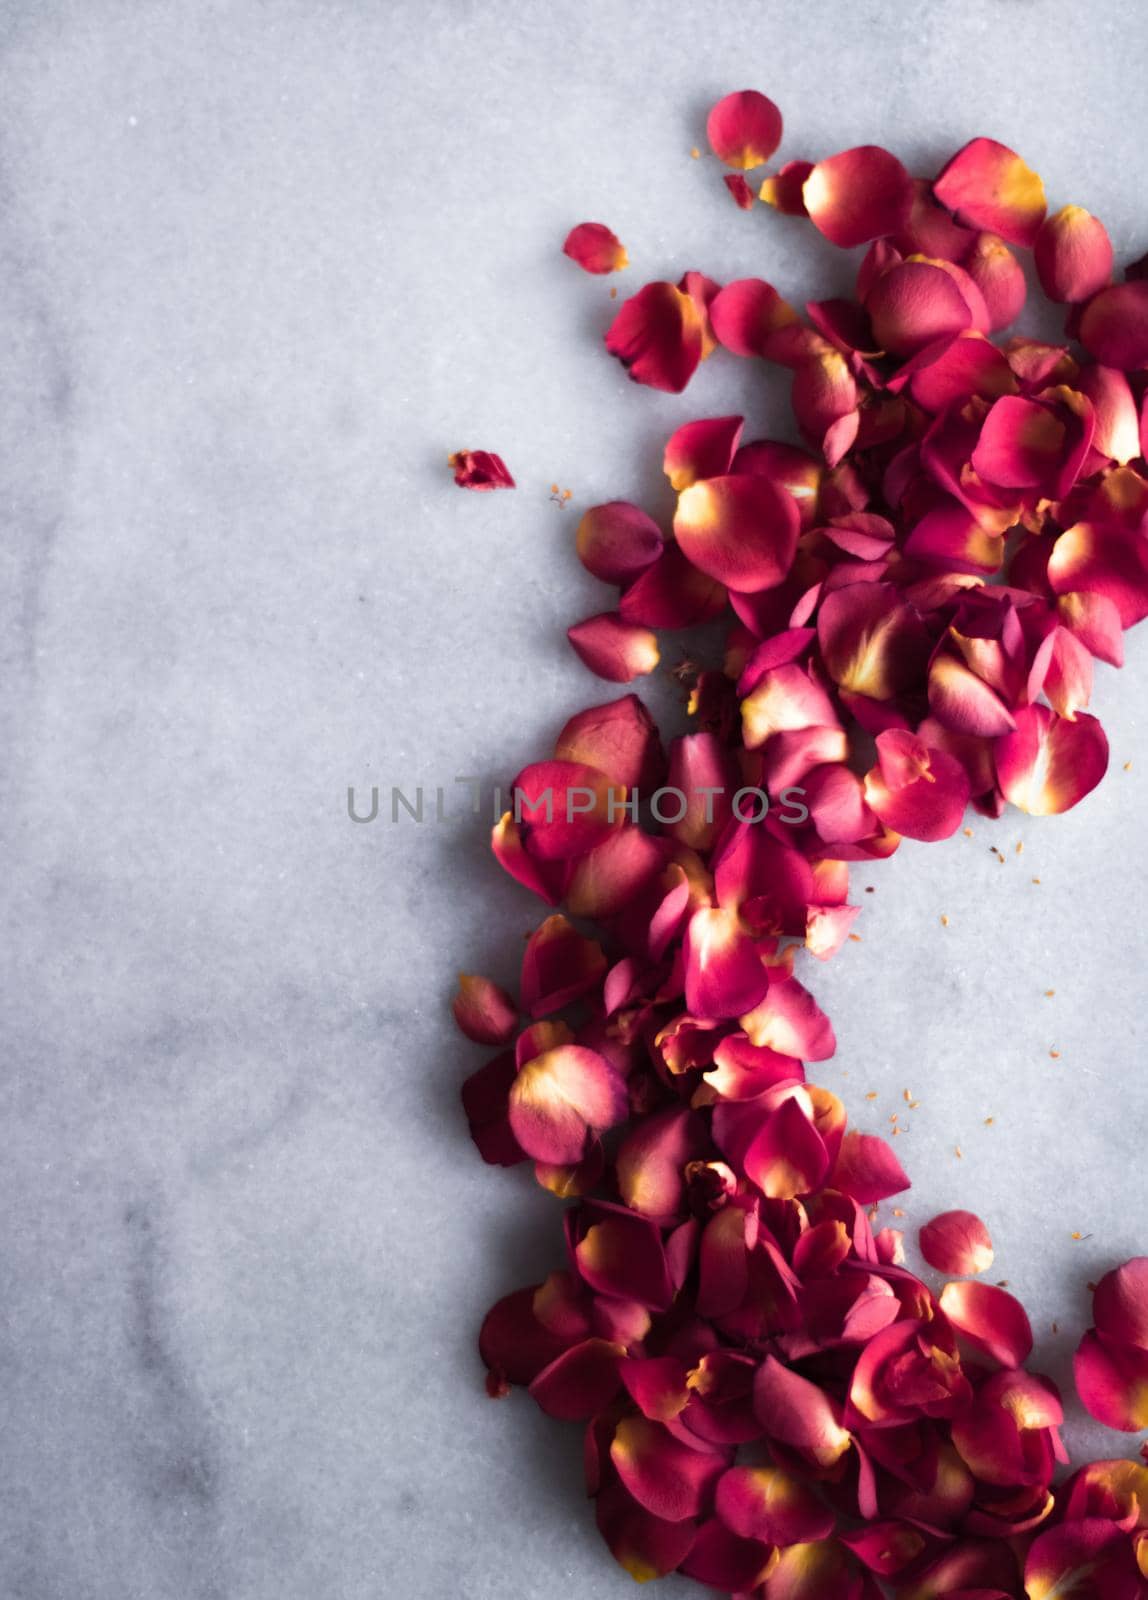 rose petals on marble flatlay - wedding, holiday and floral background styled concept